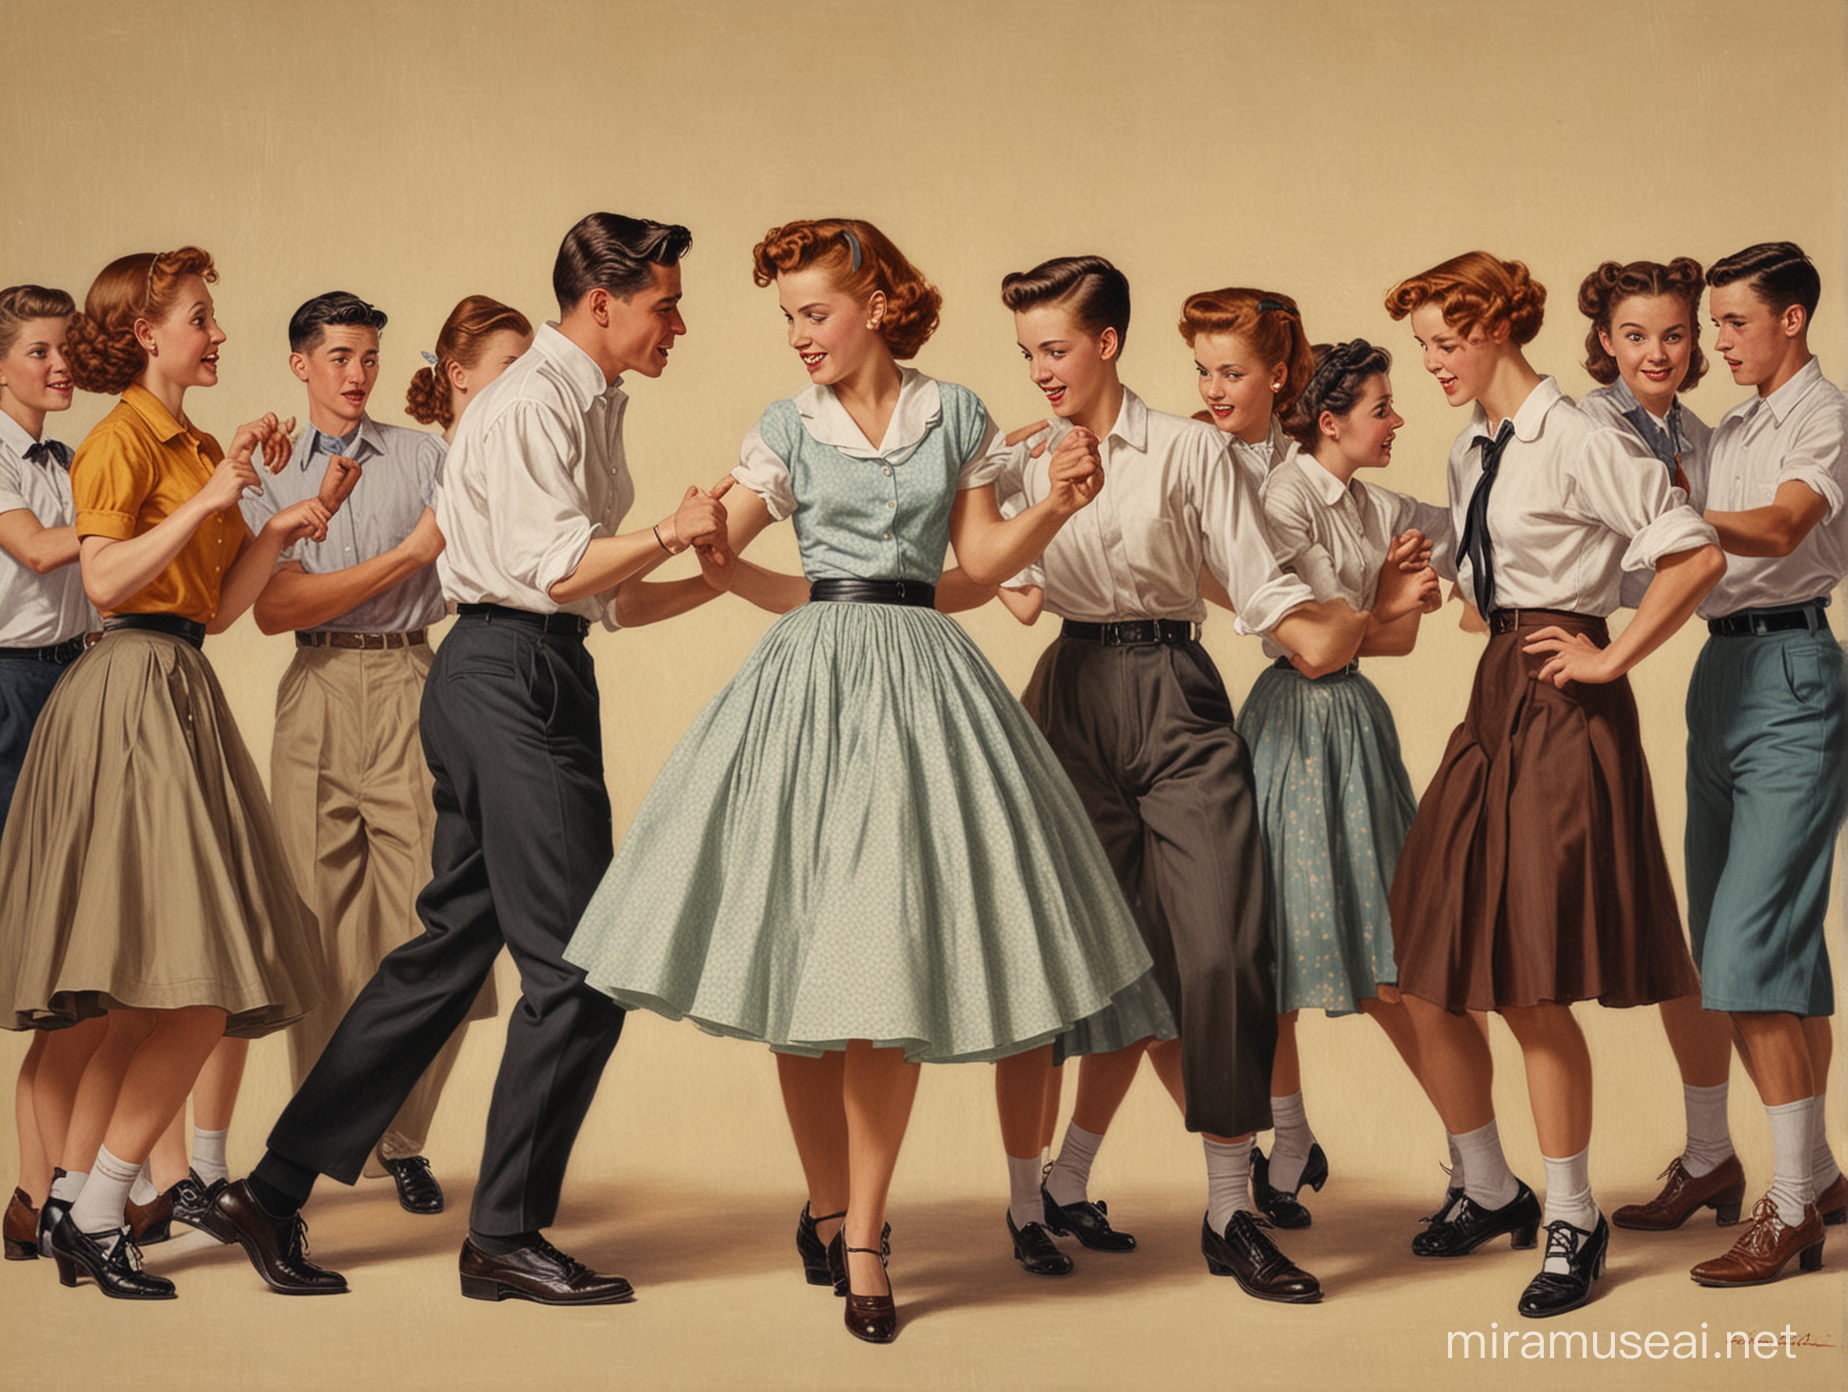 1950s teenagers, dancing,
 in the style of Norman Rockwell